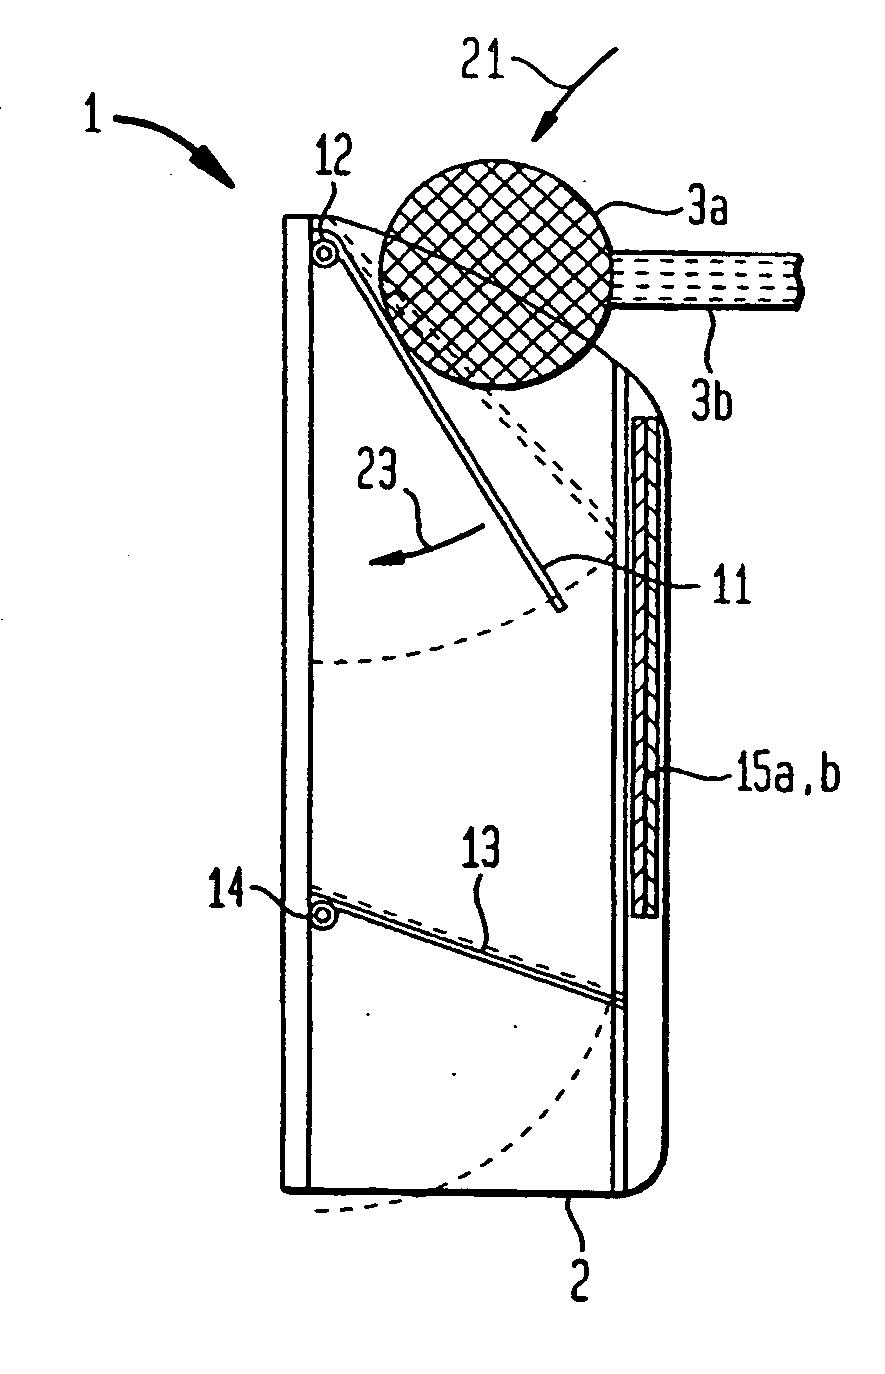 Methods and apparatus for indicating sterilization or disinfection of objects